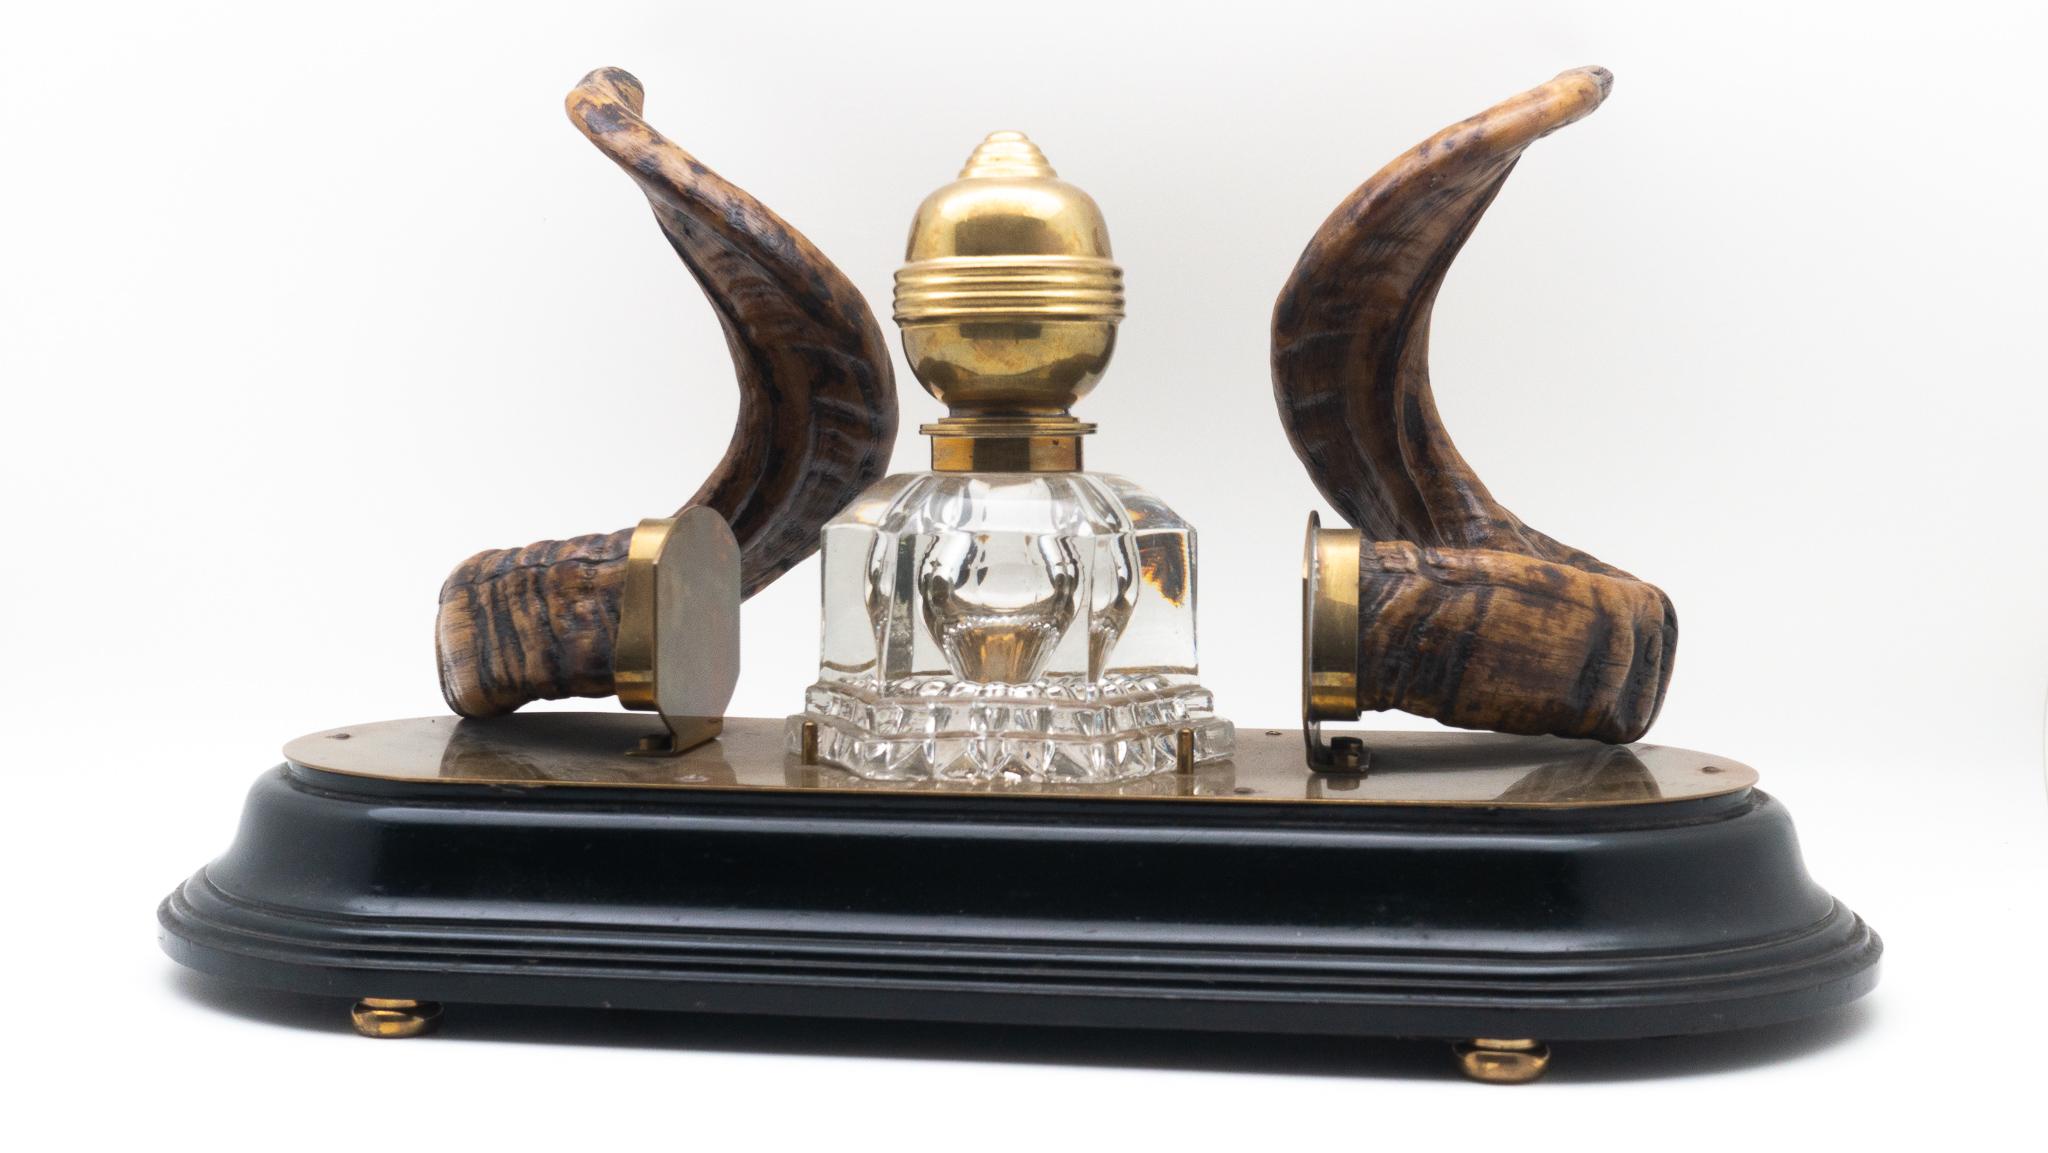 19th century ram's horn decorated inkwell, possibly Scottish. Comprised of a brass topped glass inkwell mounted on a brass and wooden oval base.